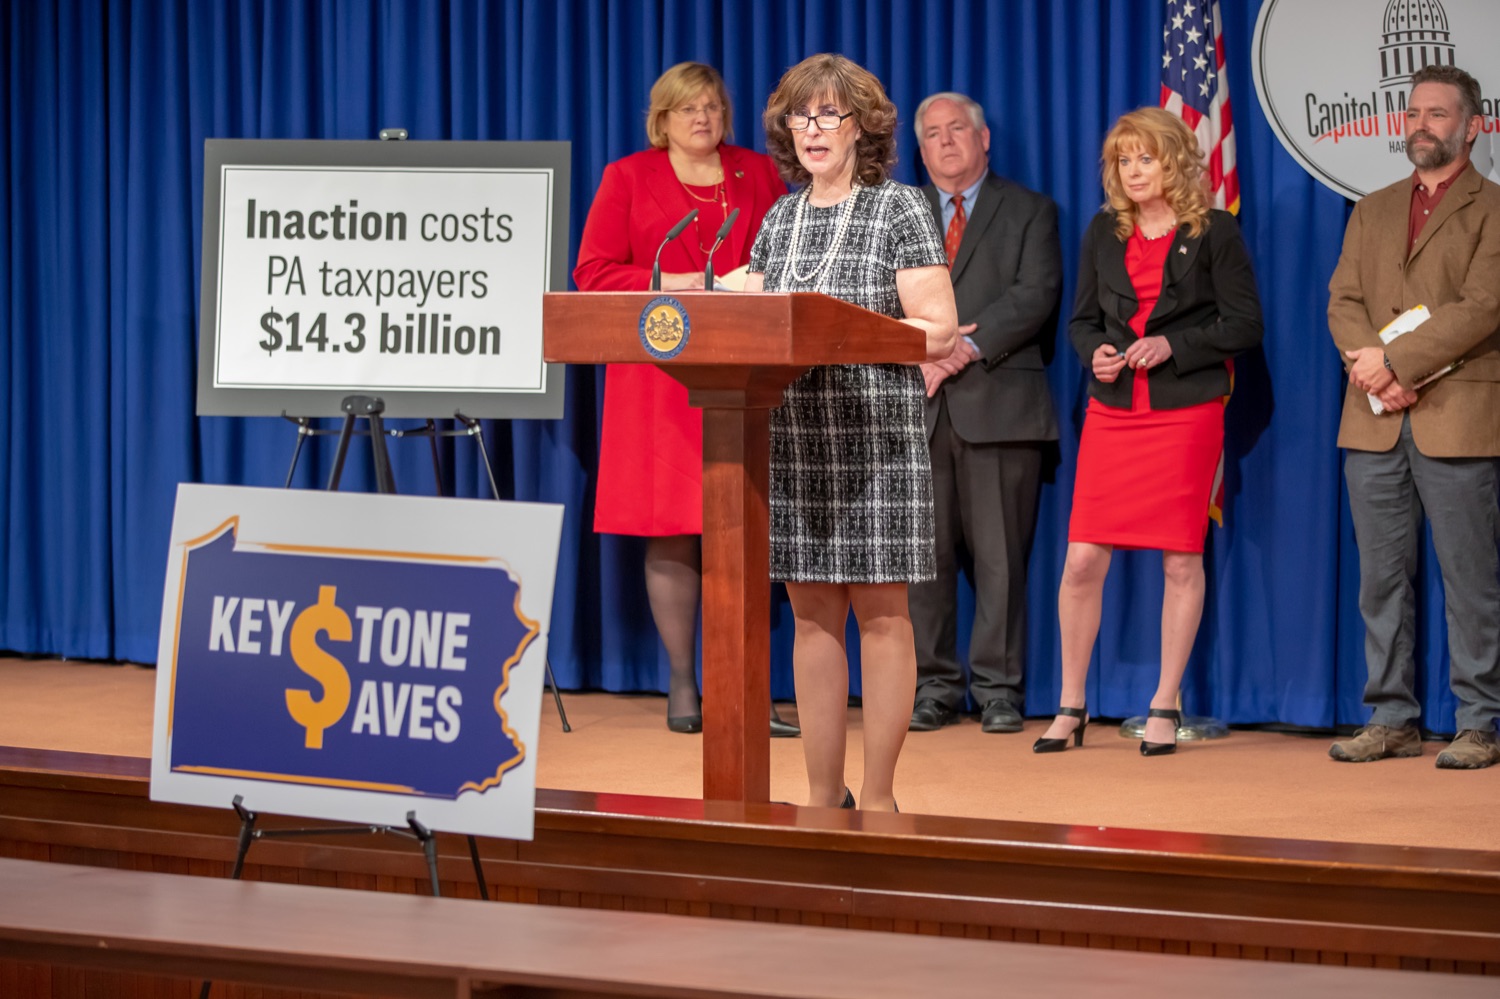 Joanne Grossi, AARP Pennsylvania State President, speaks during Mondays press conference.  Treasurer Stacy Garrity, along with Rep. Tracy Pennycuick and Rep. Driscoll announced the upcoming introduction of a bill to create Keystone Saves, a retirement savings program for hardworking Pennsylvanians who do not have access to retirement savings through their employer.  They were joined at the announcement by supporters in the General Assembly and representatives of AARP, the United Way of Pennsylvania, the Pennsylvania Health Care Association, and the Pennsylvania Association of Sustainable Agriculture. Other supporters of Keystone Saves include The Pew Charitable Trusts and the Pennsylvania Institute of CPAs. Harrisburg, PA - December 12, 2021<br><a href="https://filesource.amperwave.net/commonwealthofpa/photo/20293_TREAS_KeystoneSaves_AG_09.jpg" target="_blank">⇣ Download Photo</a>